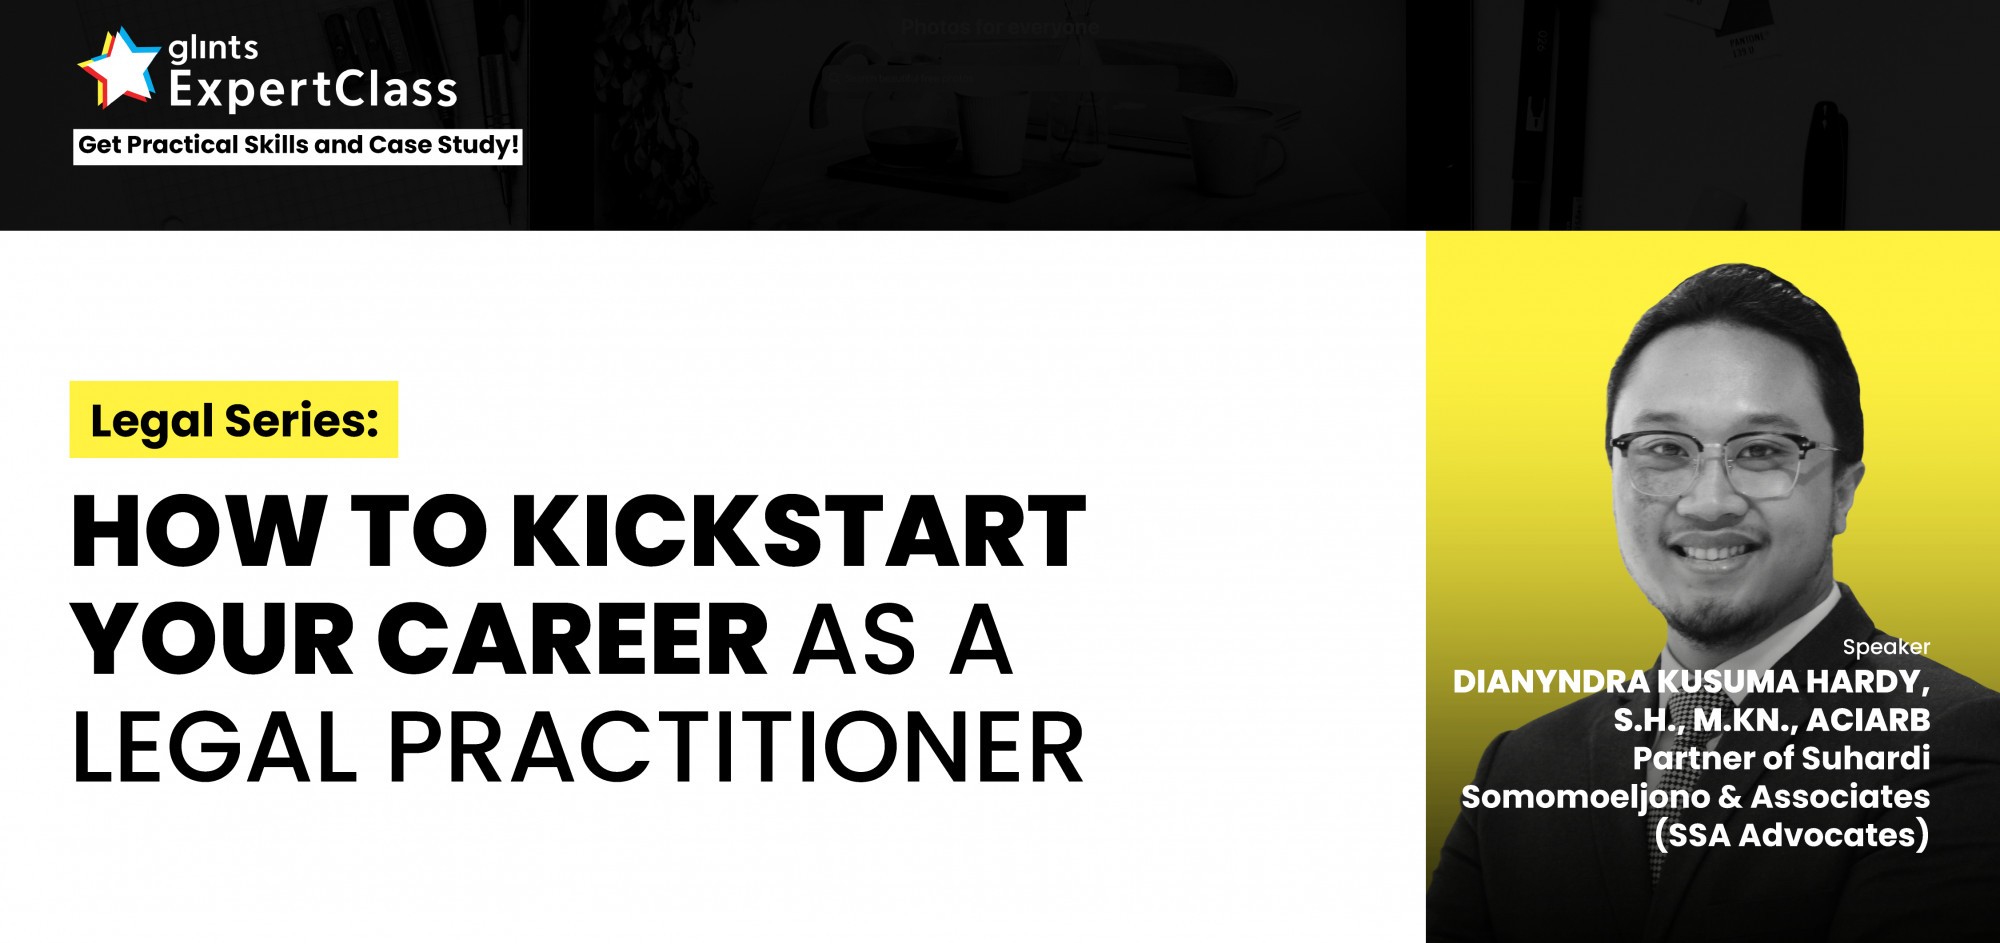 [Online Glints ExpertClass] How to Kickstart Your Career As a Legal Practitioner